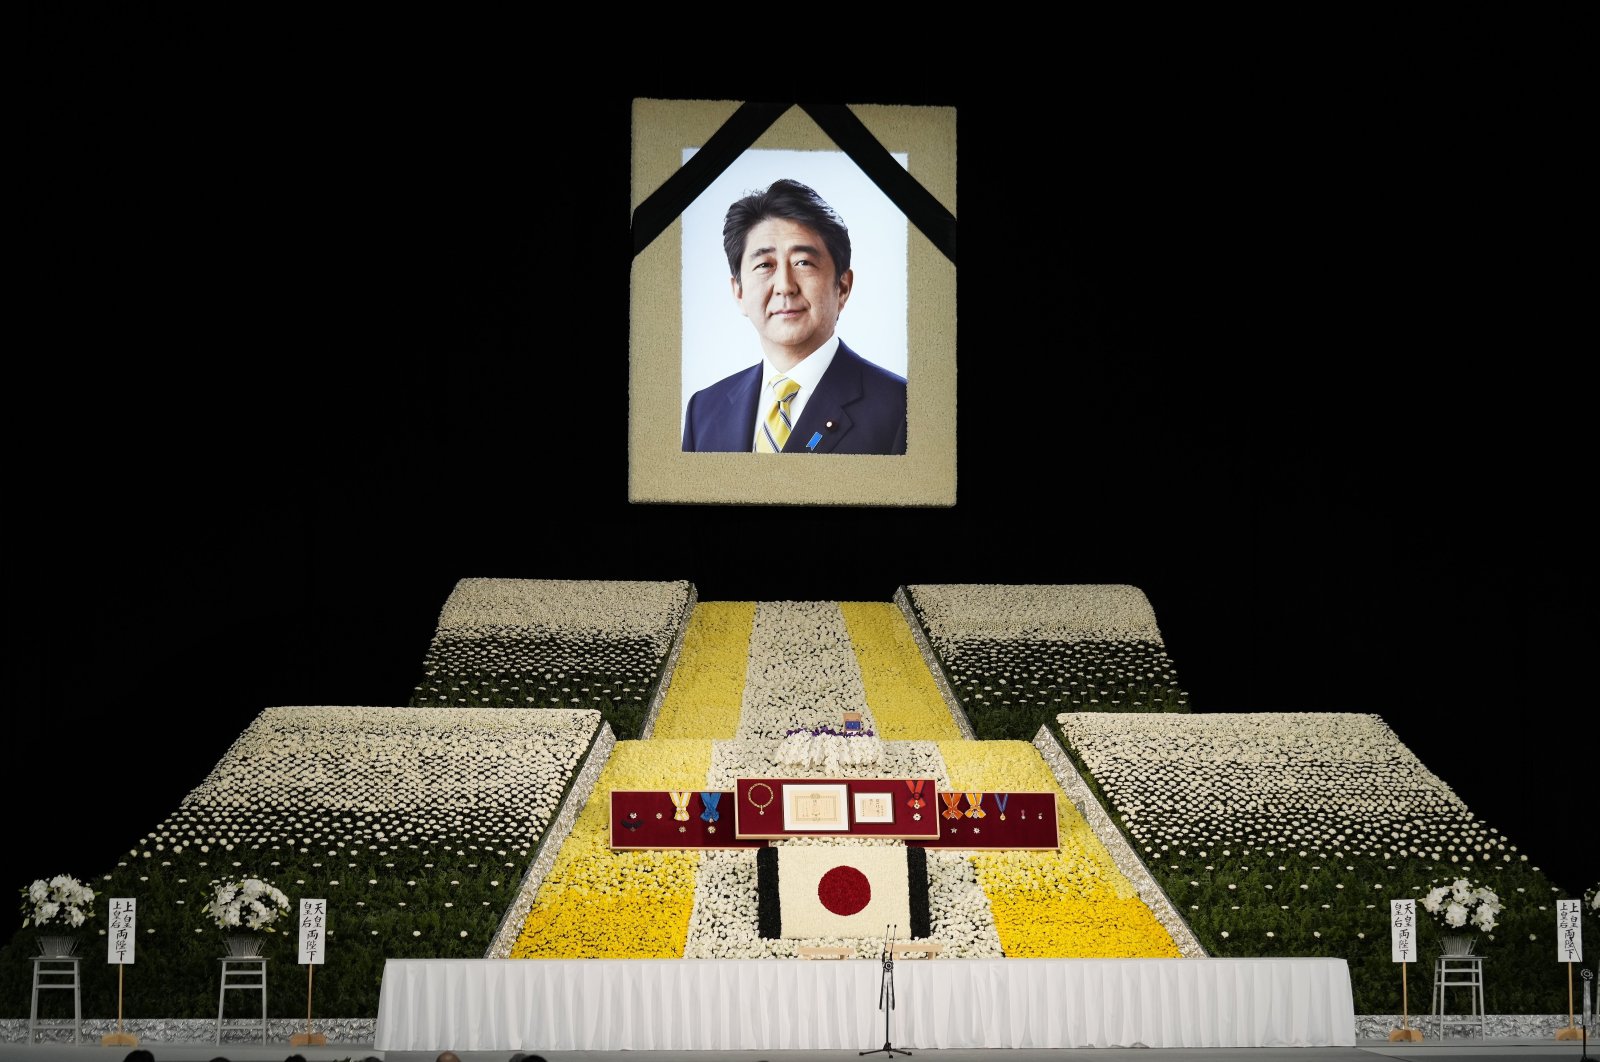 A portrait of ex-Japanese Prime Minister Shinzo Abe hangs on stage at the state funeral of former Japanese Prime Minister Shinzo Abe at Nippon Budokan in Tokyo, Japan, Sept. 27, 2022. (EPA Photo)